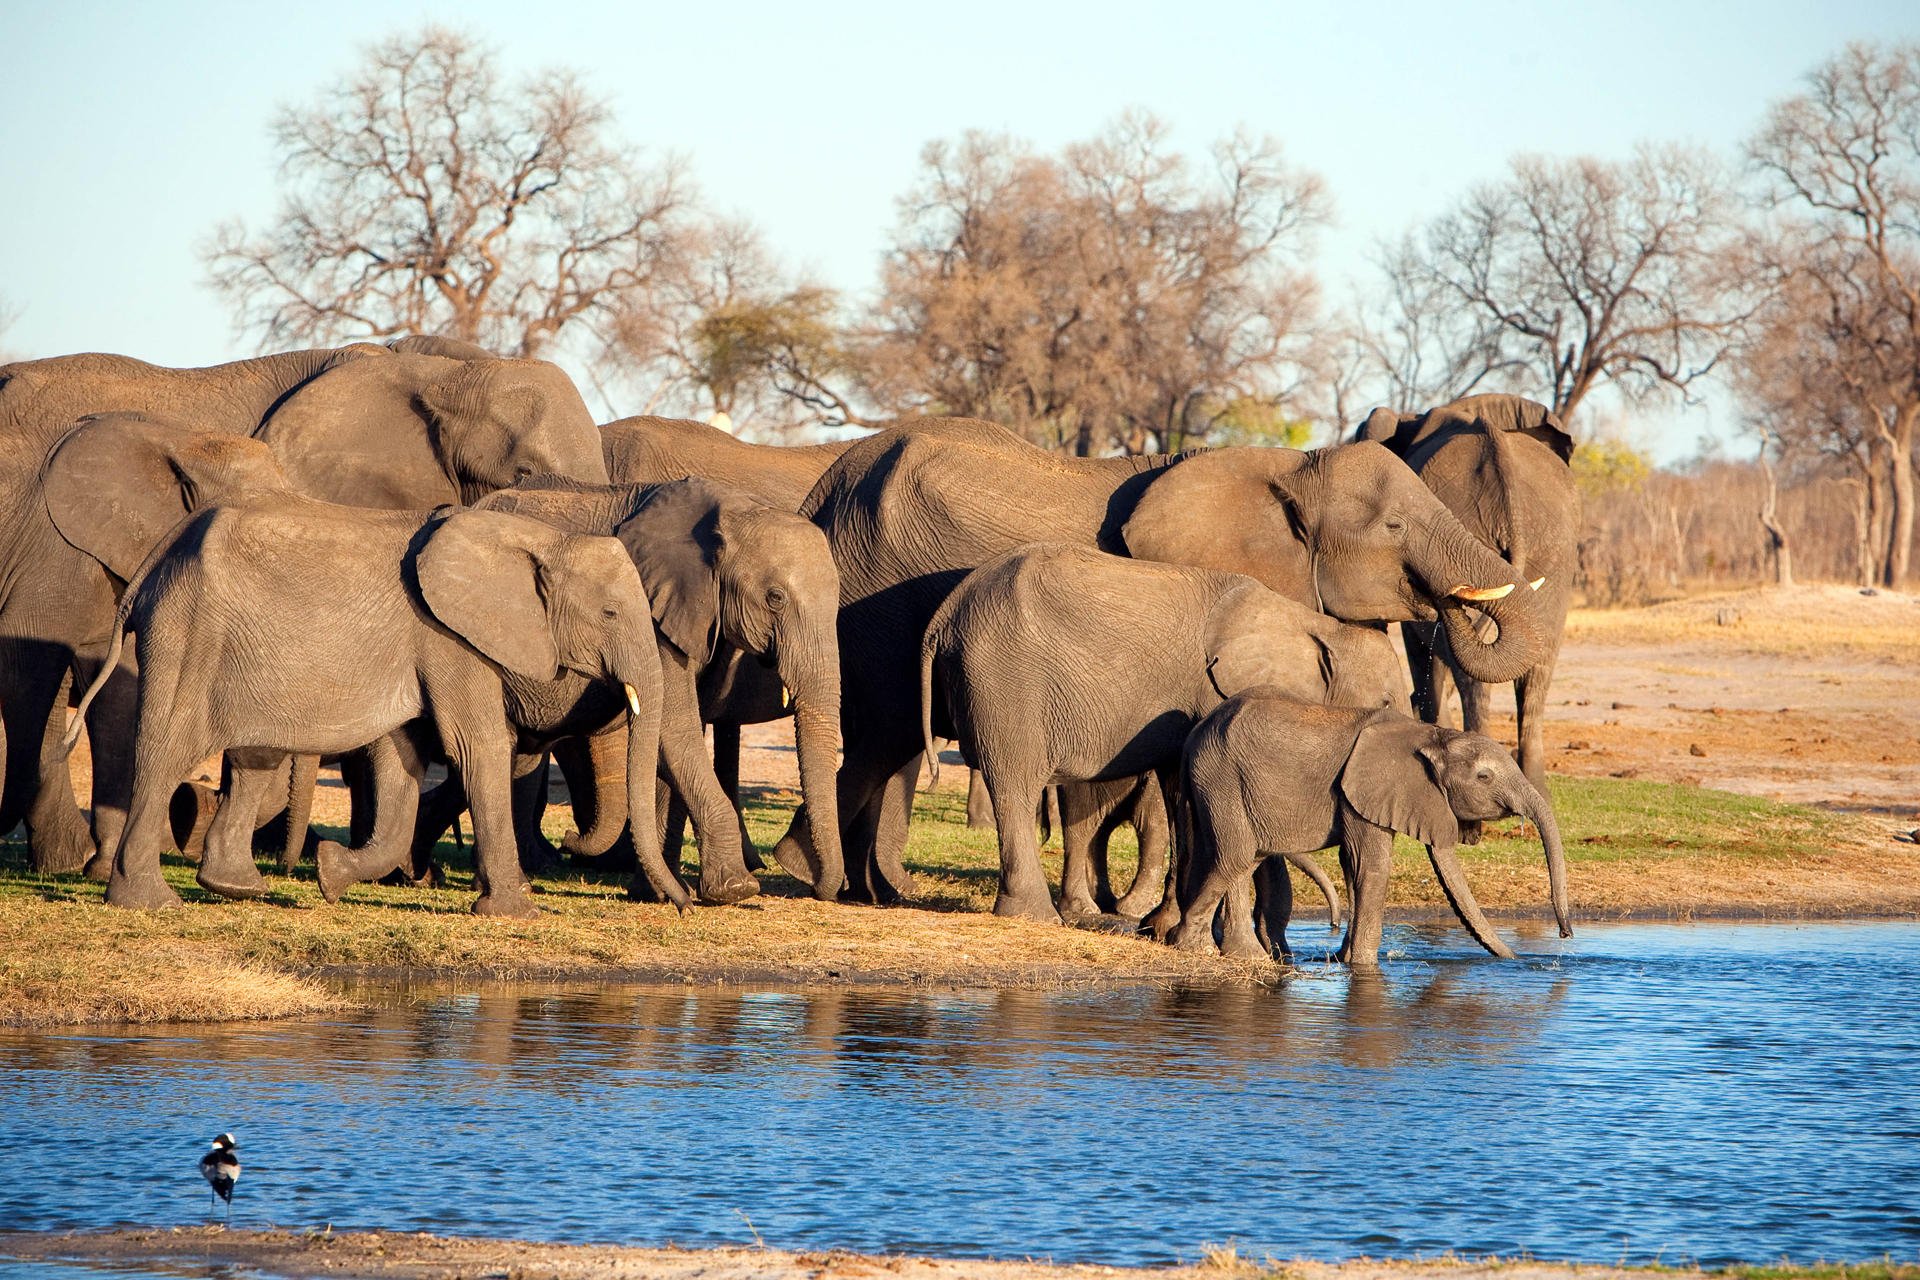 Elephants : 6 of the Best National Parks